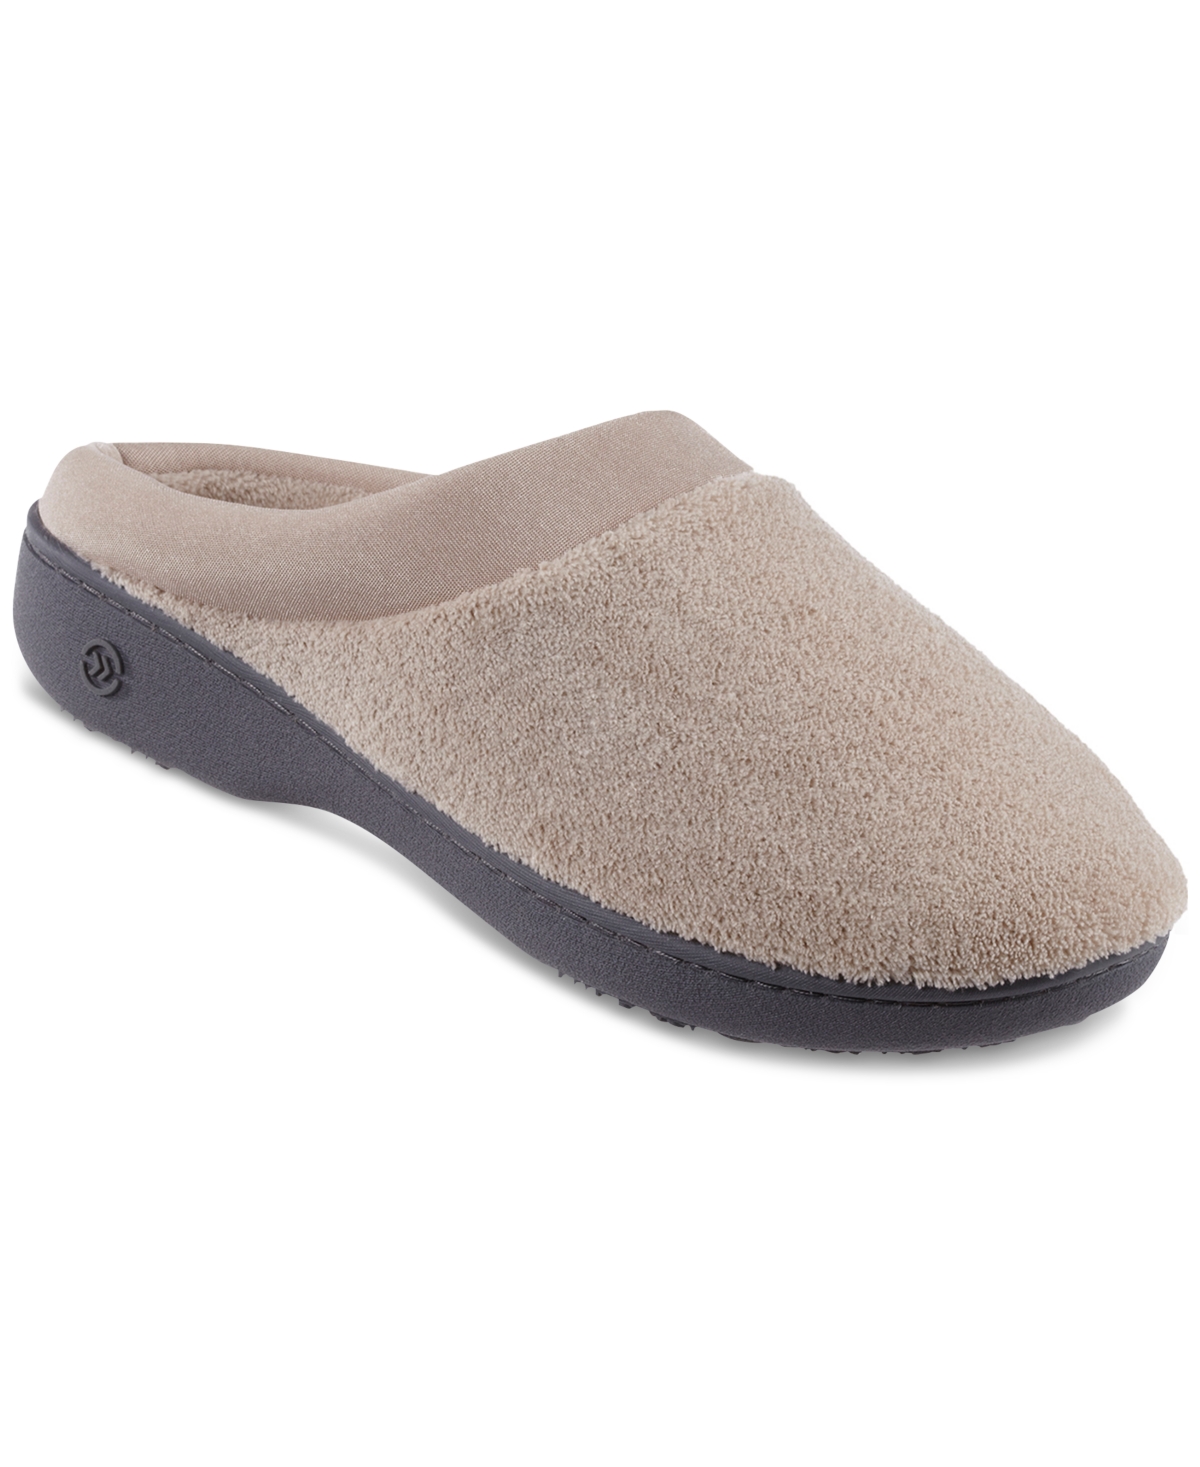 ISOTONER Microterry PillowStep Satin Cuff Clog Slippers for Women Taupe Beige 